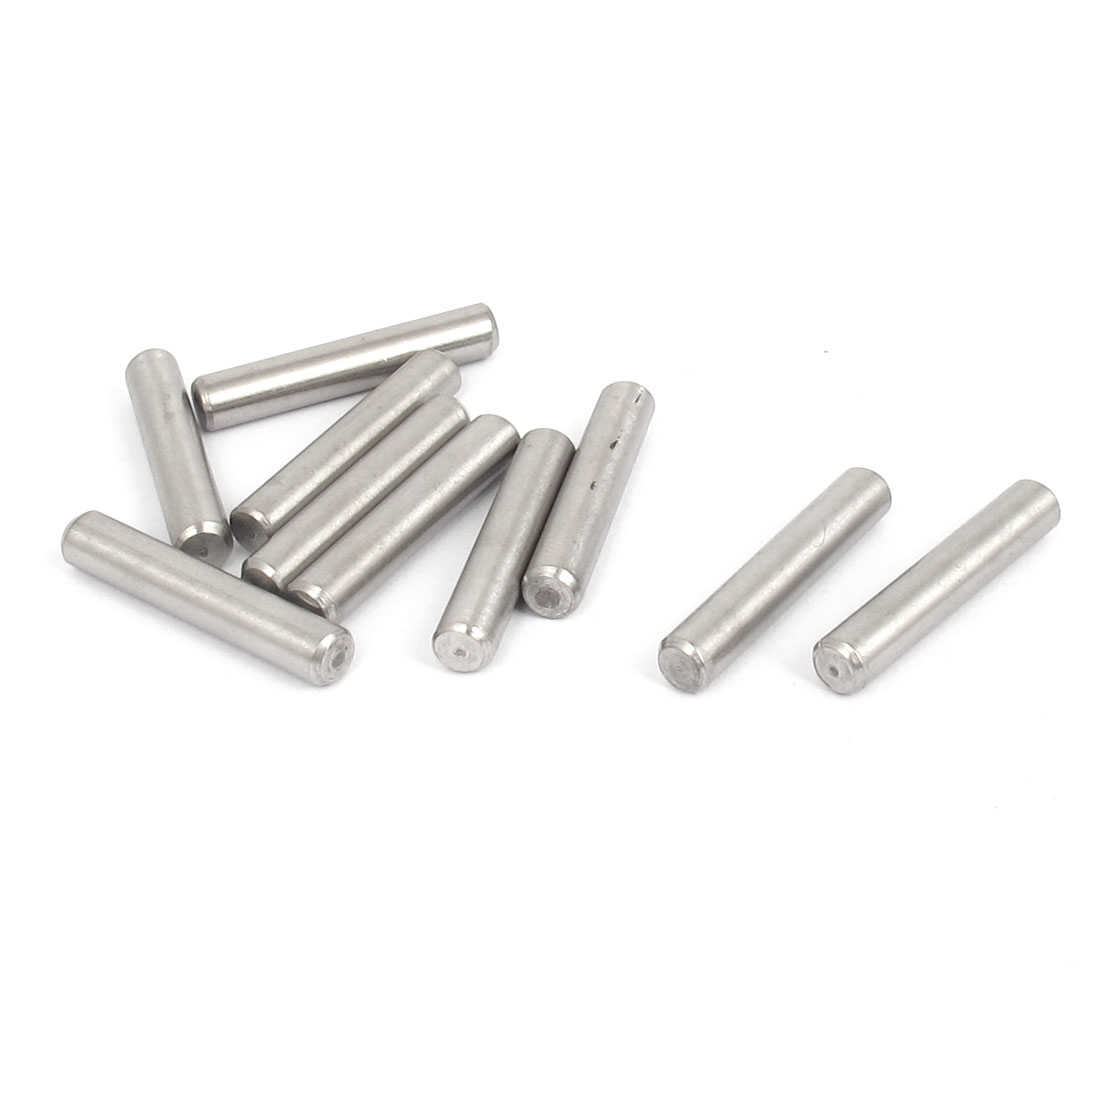 5mmx28mm 304 Stainless Steel Parallel Dowel Pins Fastener Elements 10pcs